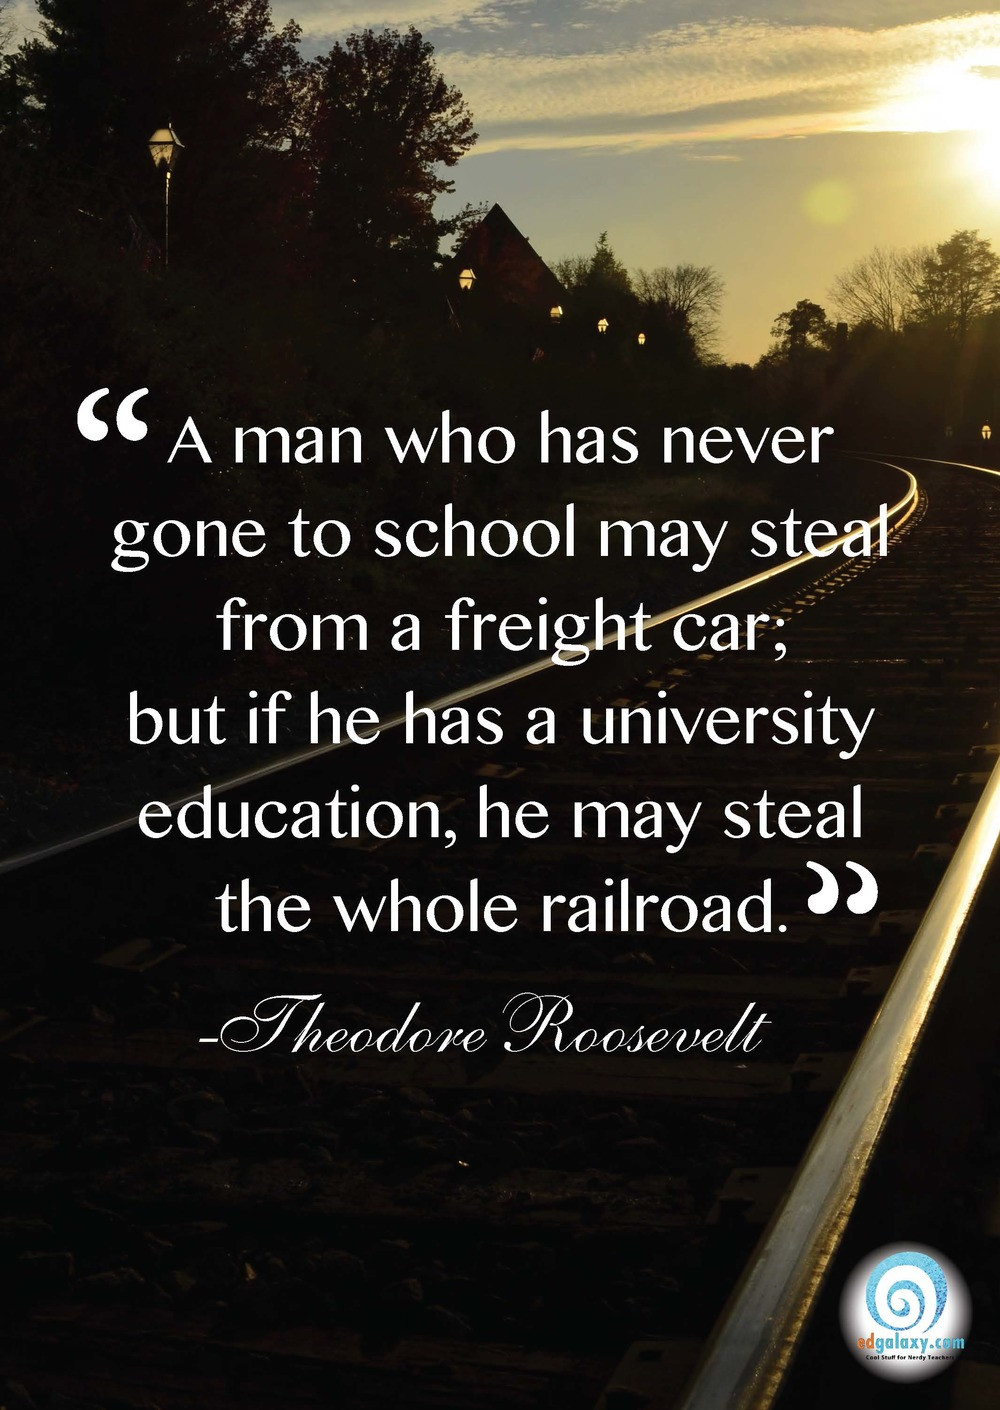 Inspirational Quotes About Education
 Education Quotes Inspirational QuotesGram